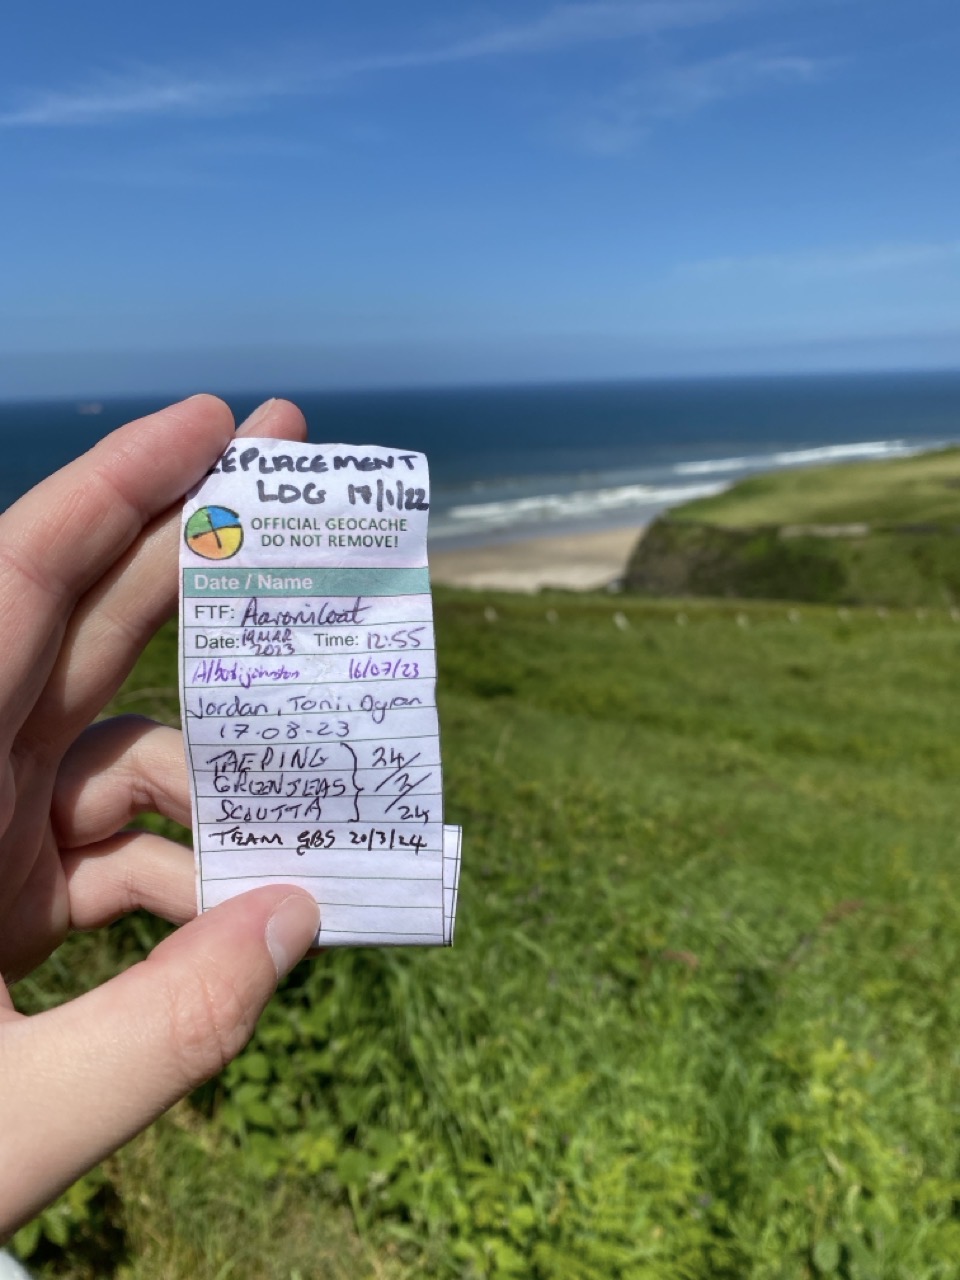 The log book from the geocache, with blue sky and sea in the background.